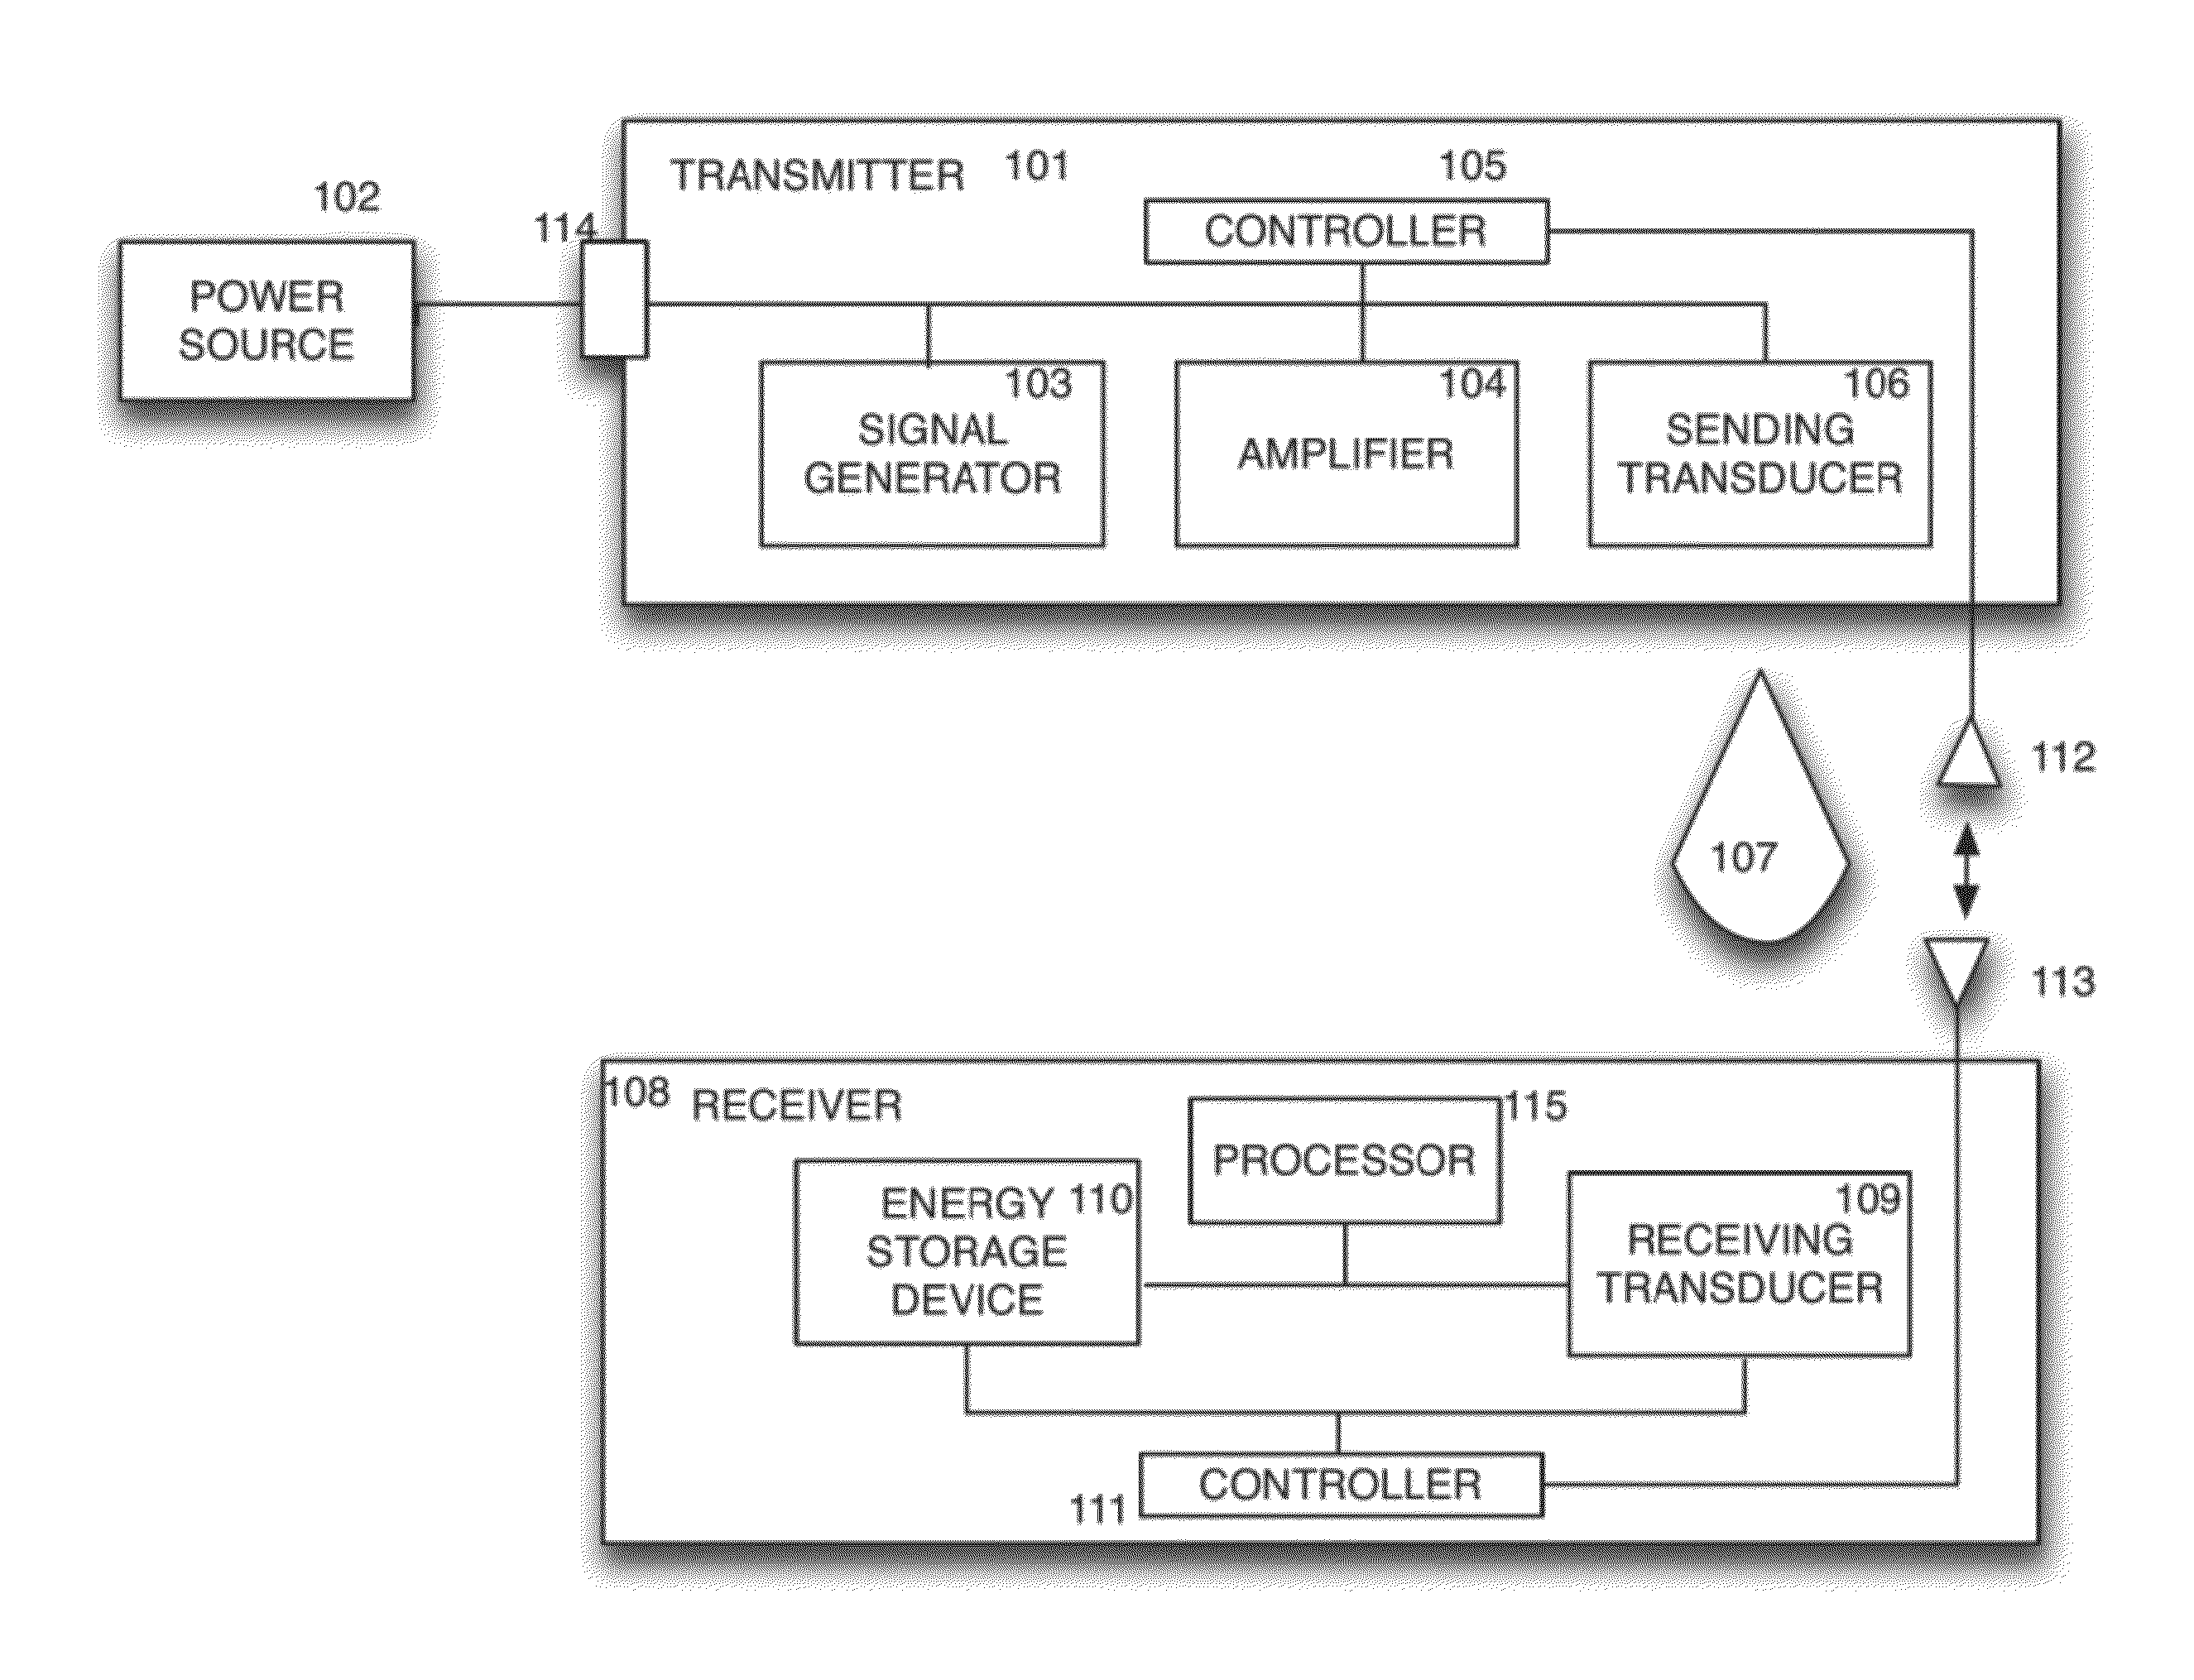 Receiver controller for wireless power transfer